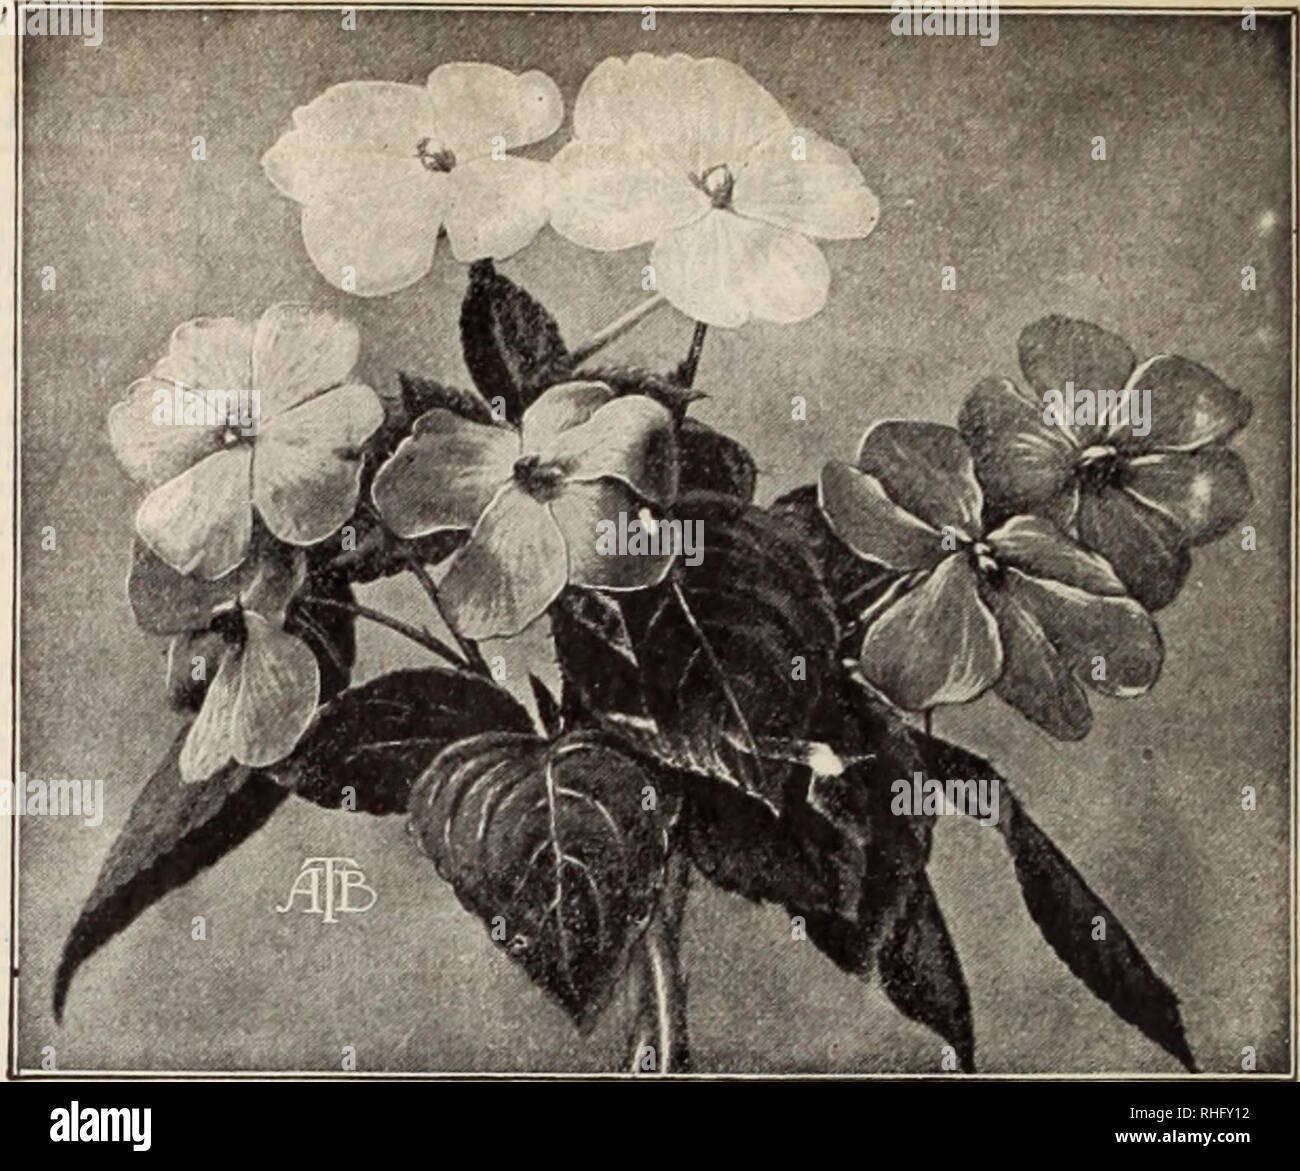 . Boddington's quality bulbs, seeds and plants / Arthur T. Boddington.. Nursery Catalogue. 4 Arthur T. Boddin^'ton, 342 West 14th St.. New York Ci Impatiens Holstii, New Hybrids (Mixed) It is seldom that a novelty comes as cjuickly iiitcj general favor as the splendid East African Balsam, Impaliens Holslii. With its bril- Jiant vermilion-red fiowers, it is indeed an excellent pot-plant, and also extremely useful for the open border, groups in a half-sunnj' position producing a striking effect. It may be remarked that the broad-petaled blooms are i K to iV-, inches in diameter, i. e., larger th Stock Photo